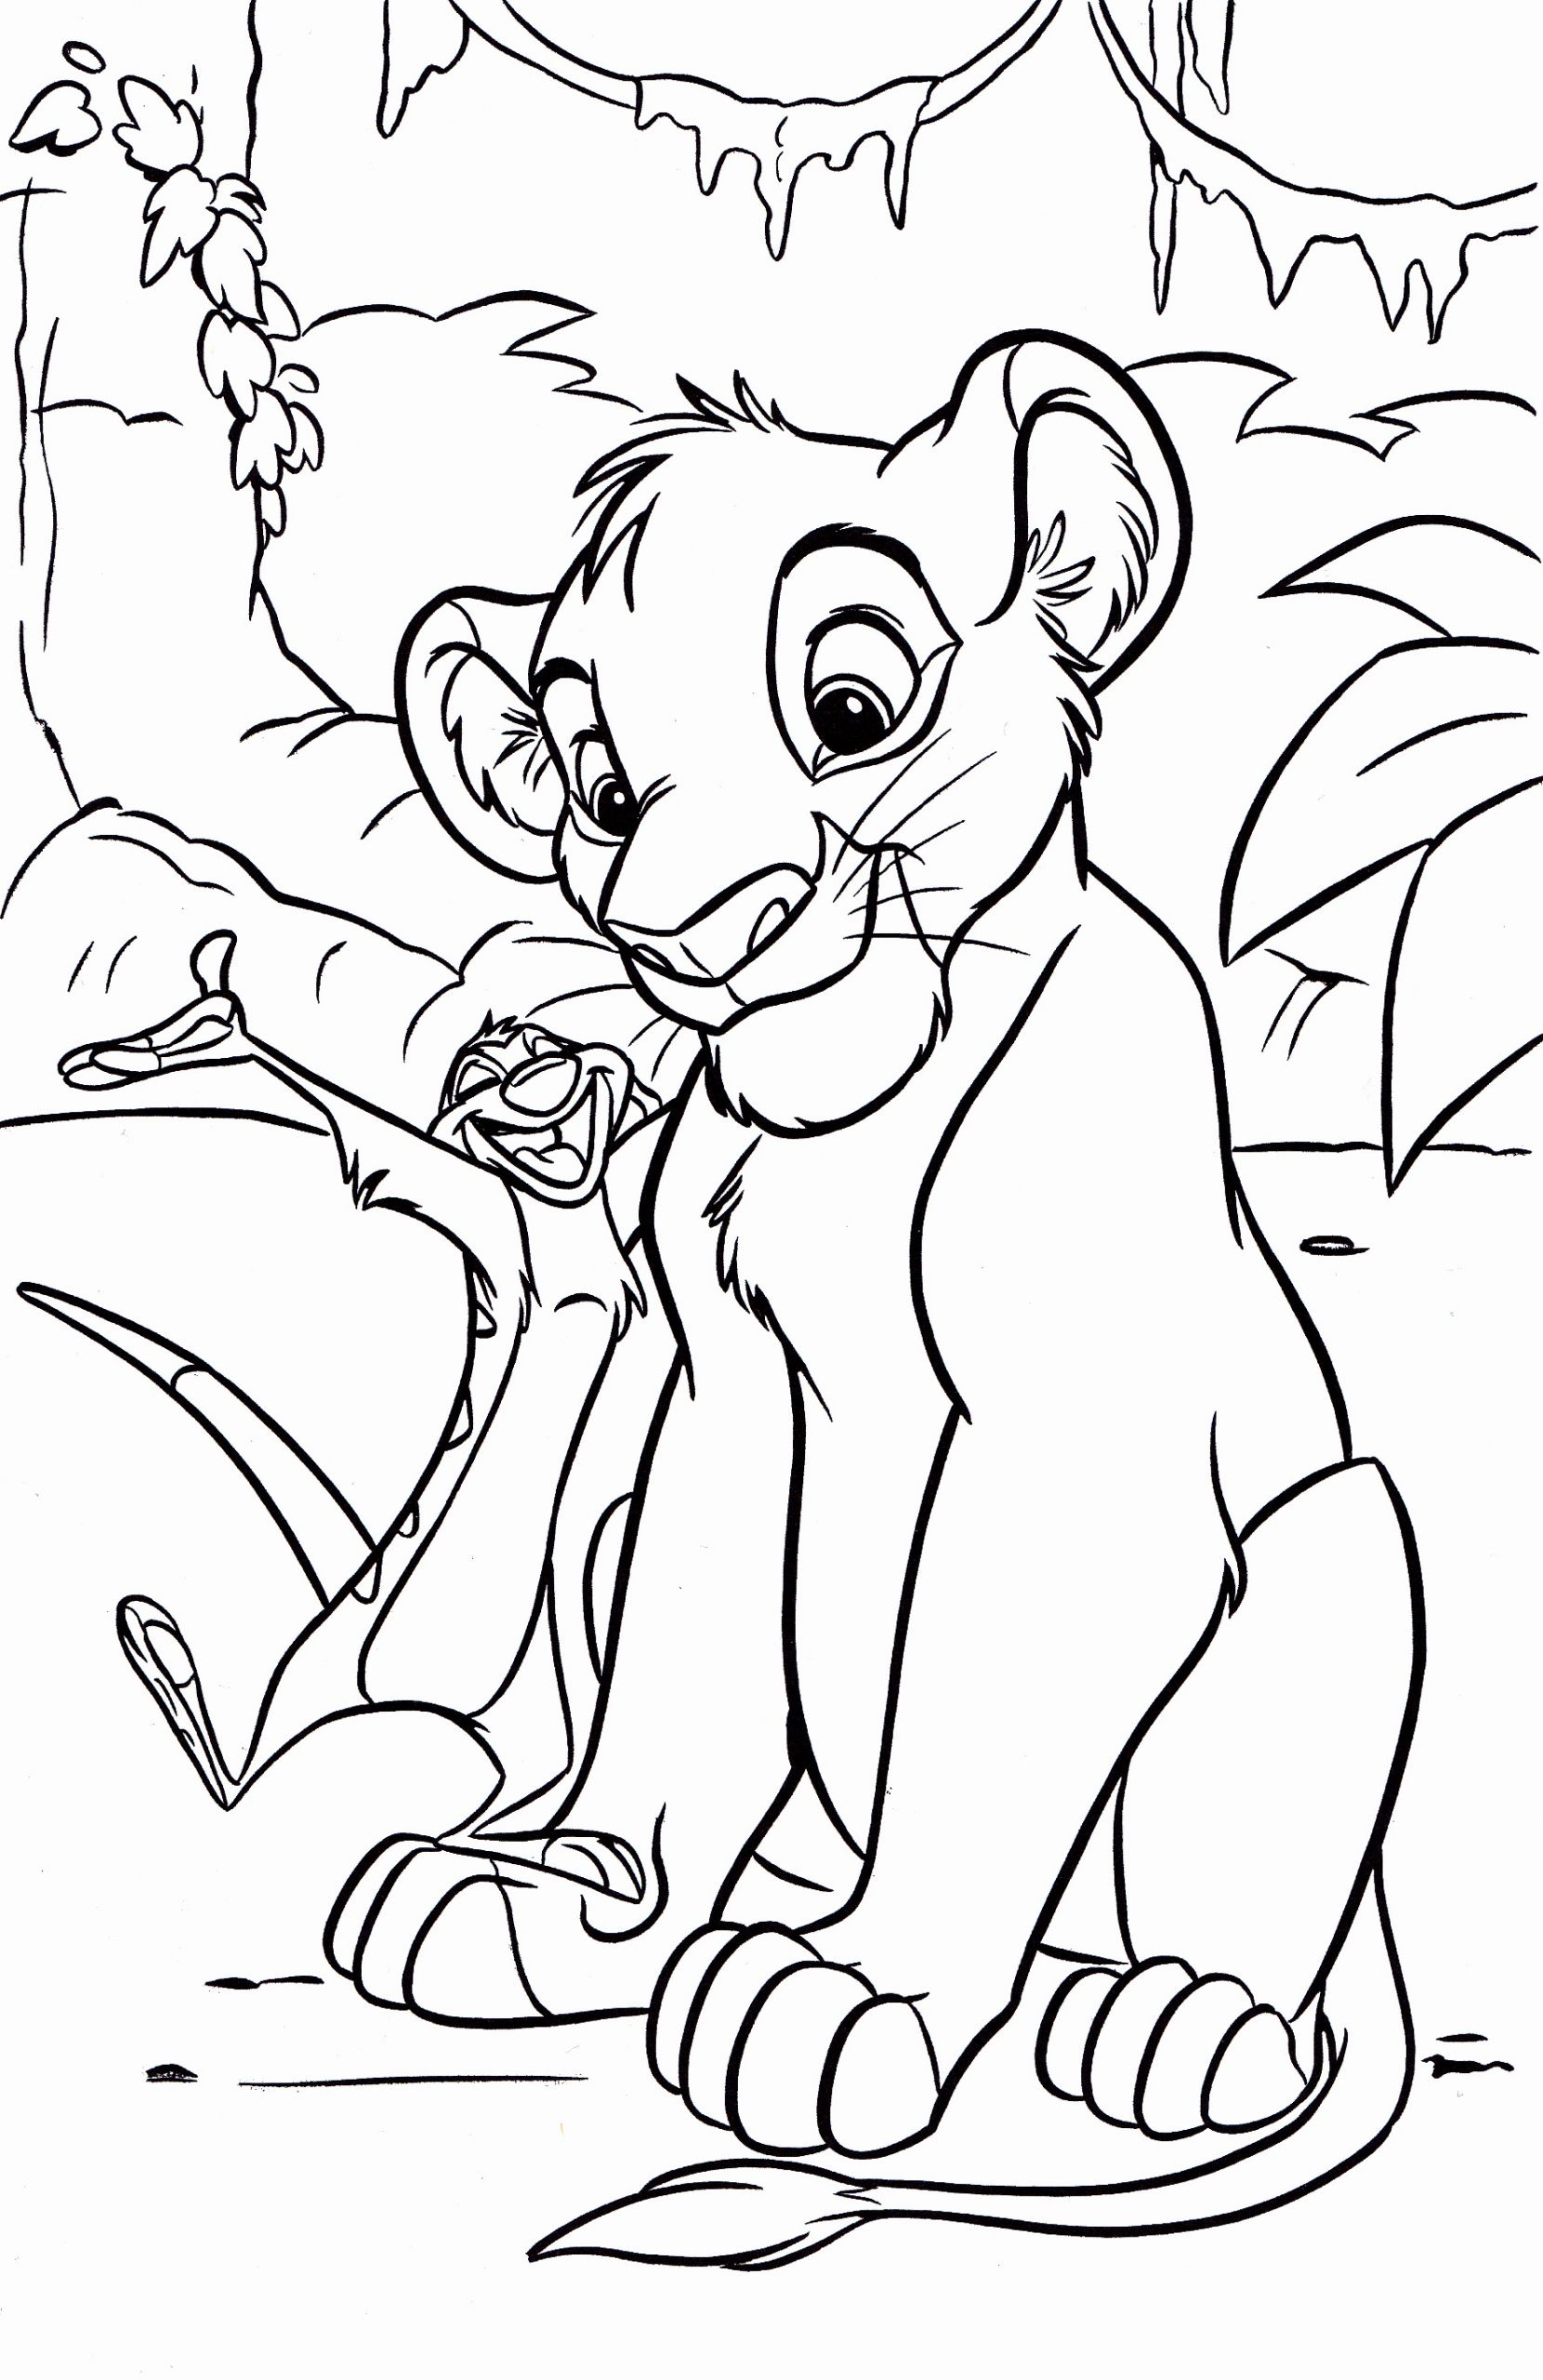 Boys Disney Coloring Pages
 Coloring Pages Colouring Pic For Kids Disney Coloring